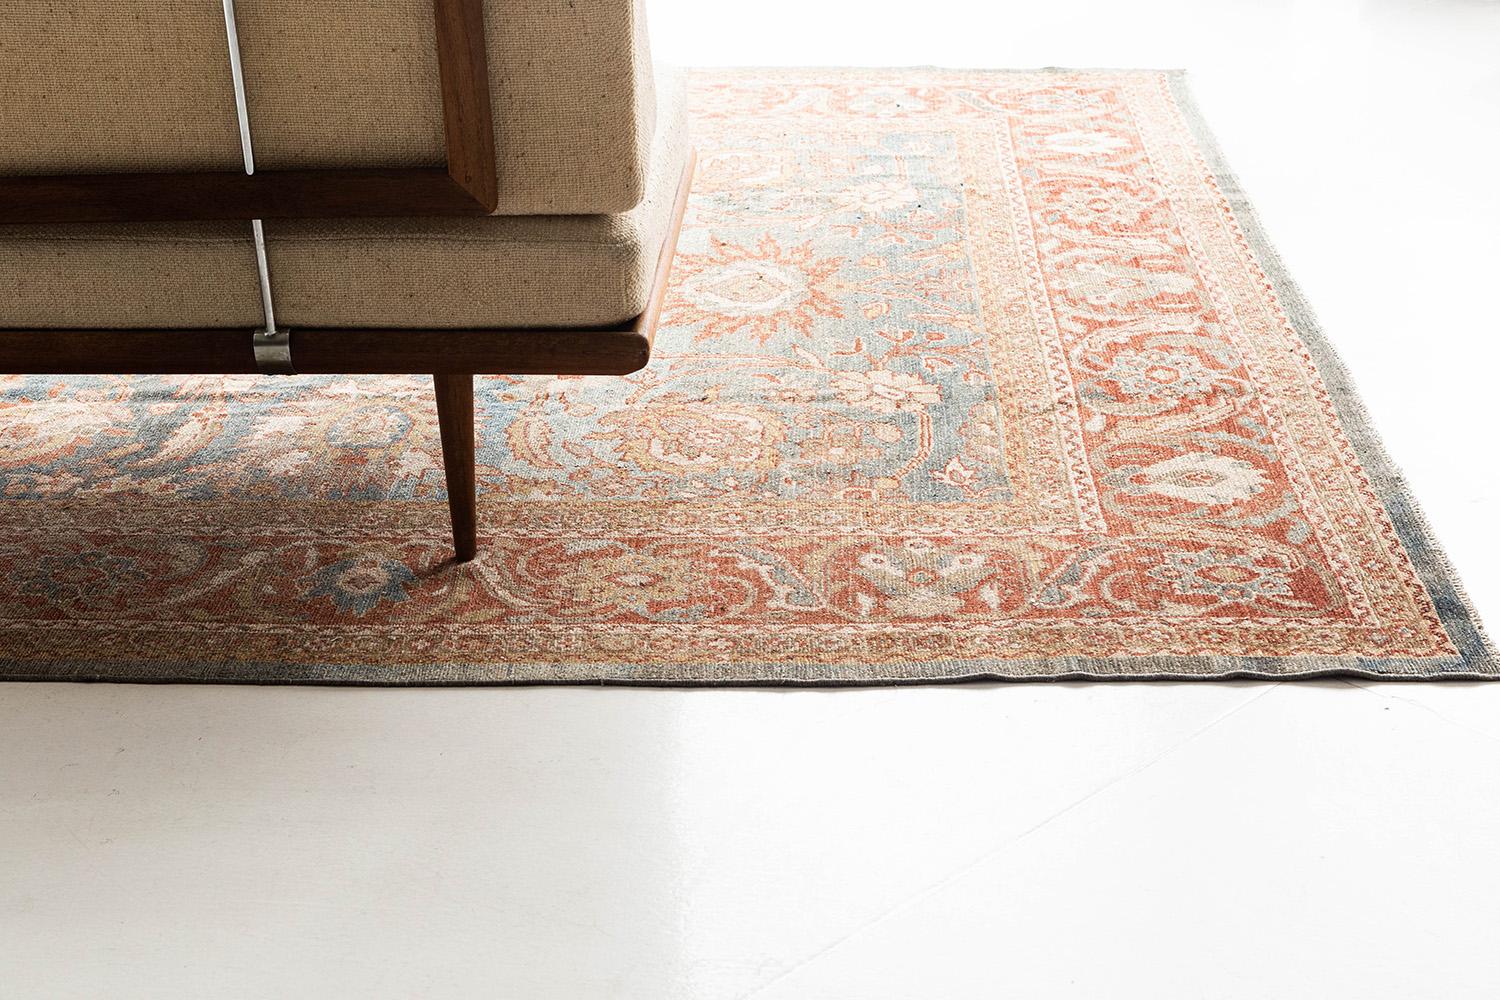 With its powerful details and intricacy, this Farahan rug created a timely design for modern and traditional settings. Warm tones are featured to the scrolling patterns and well-complement with the blooming motifs in a saturated blue field. A home